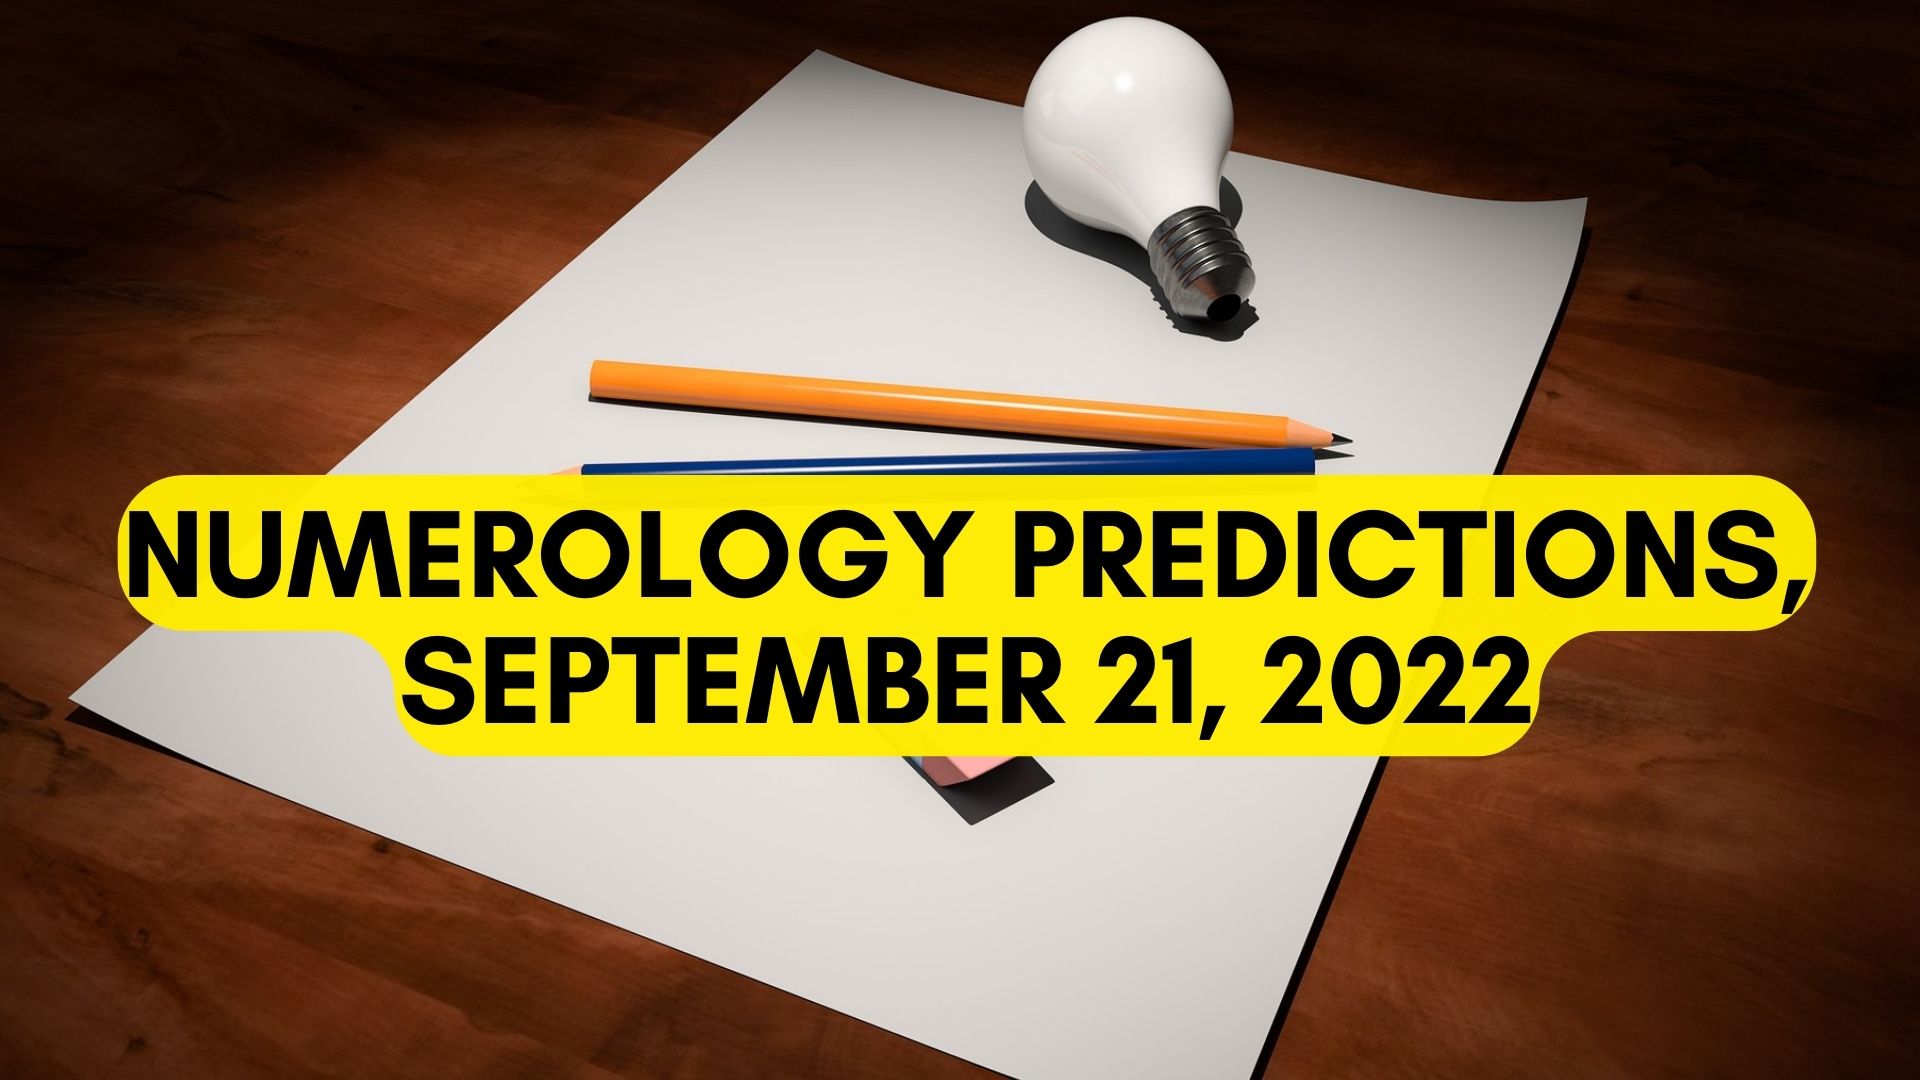 Numerology Predictions, September 21, 2022 - Check Out Your Lucky Numbers And Other Details